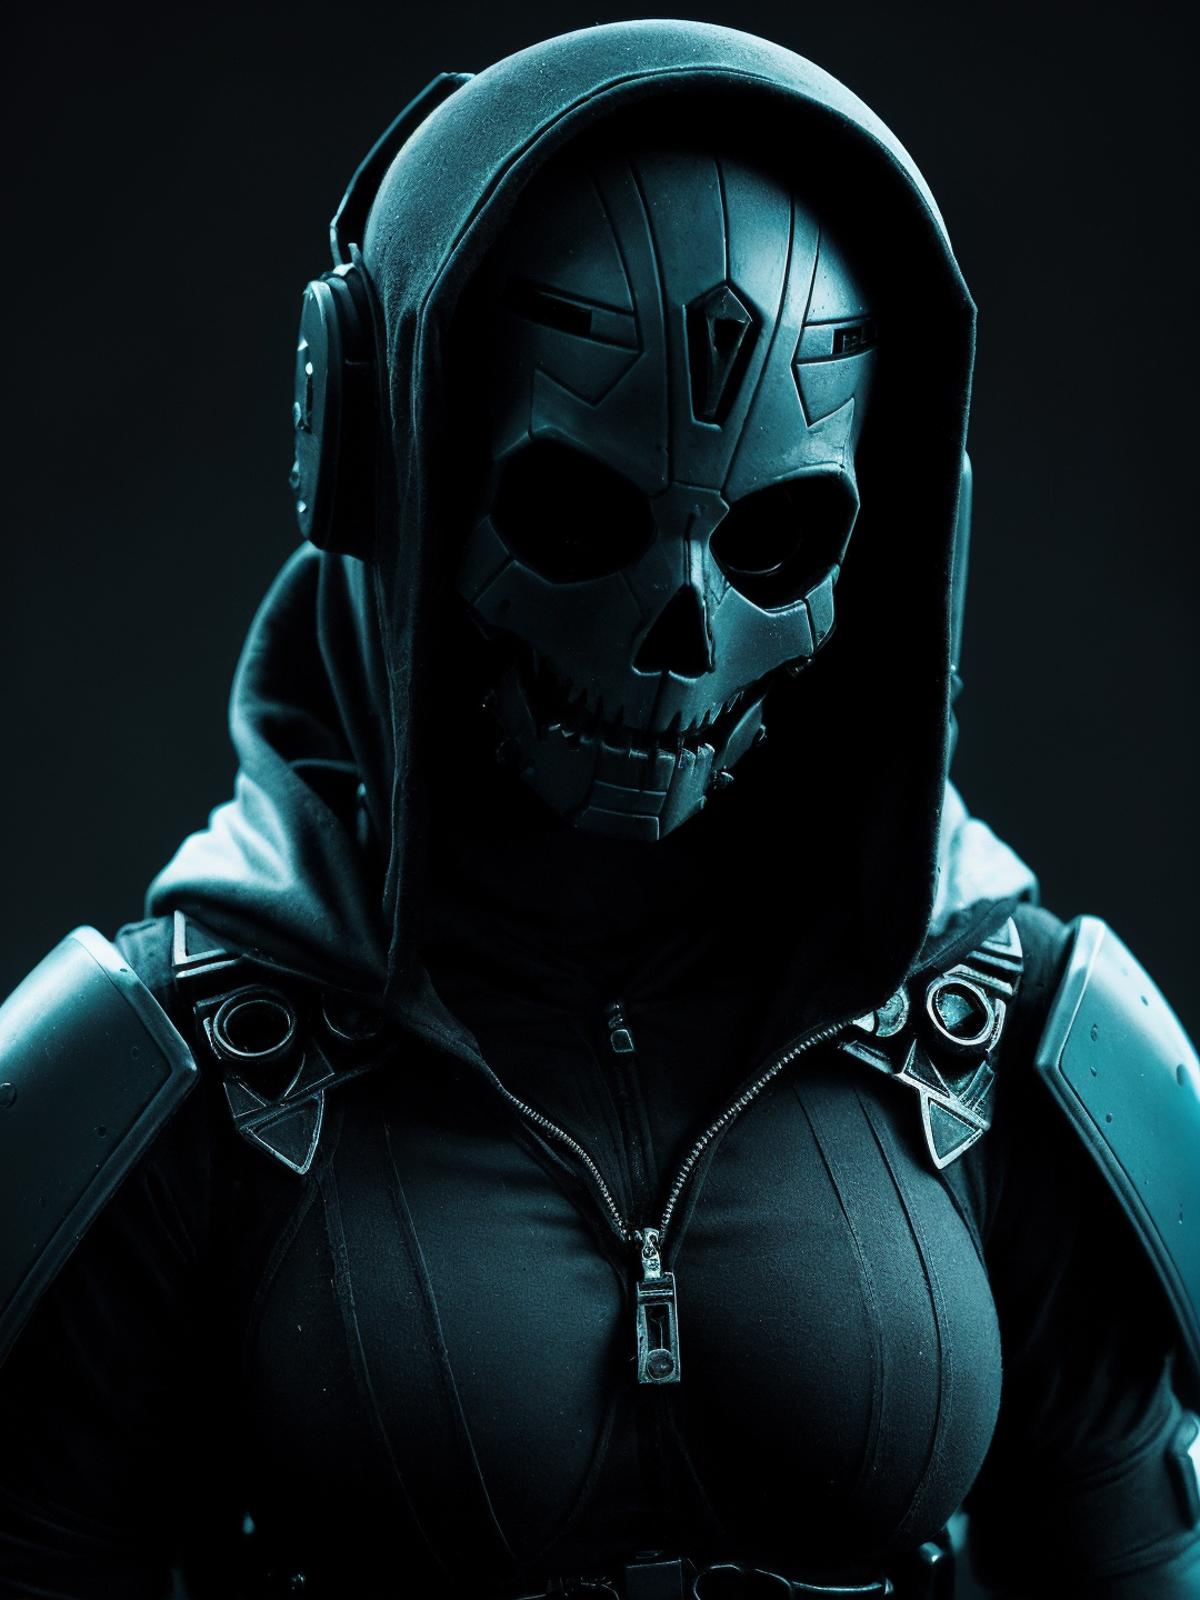 A digital art of a person wearing a mask and hoodie.